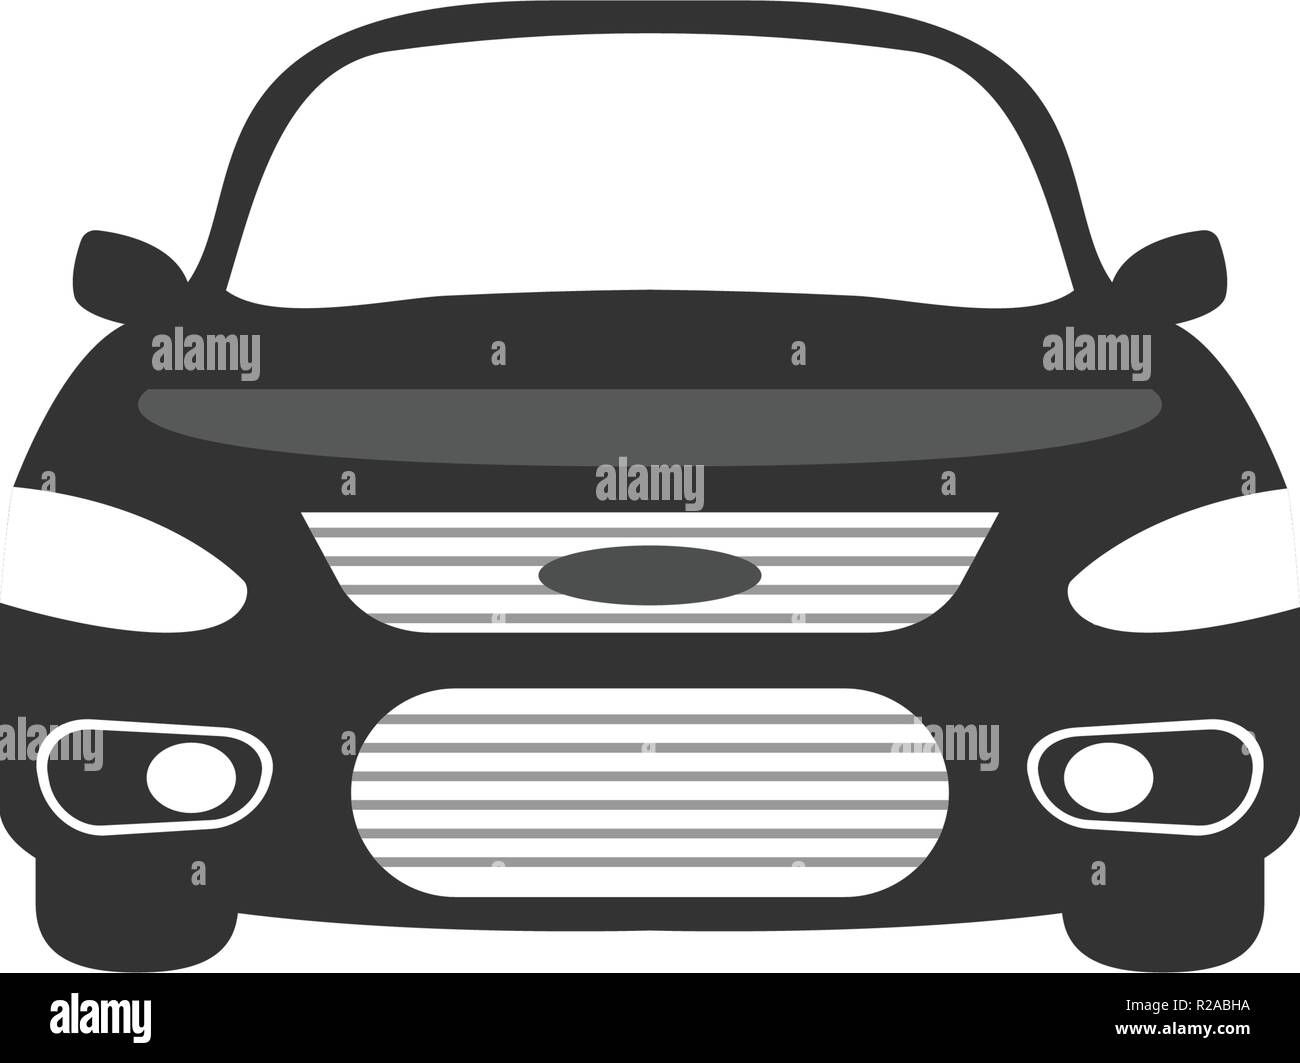 Car front side graphic design template vector Stock Vector